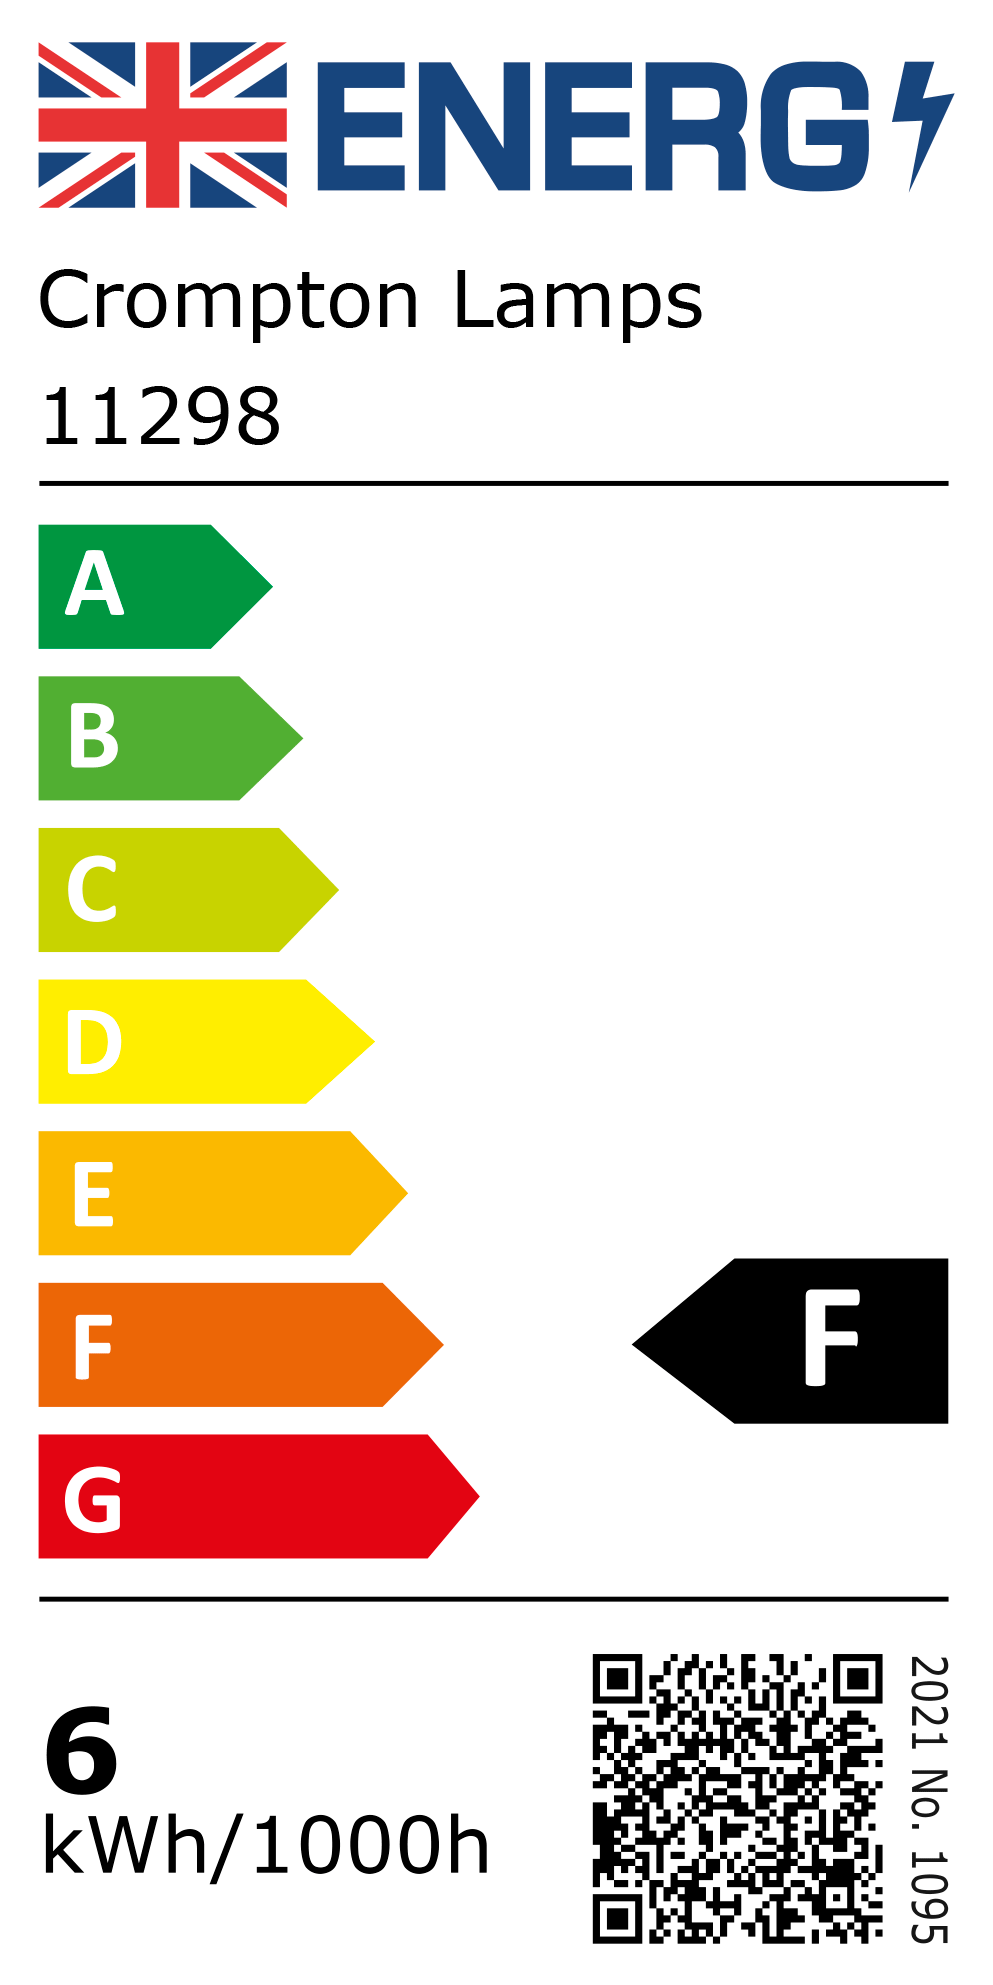 New 2021 Energy Rating Label: Stock Code 11298